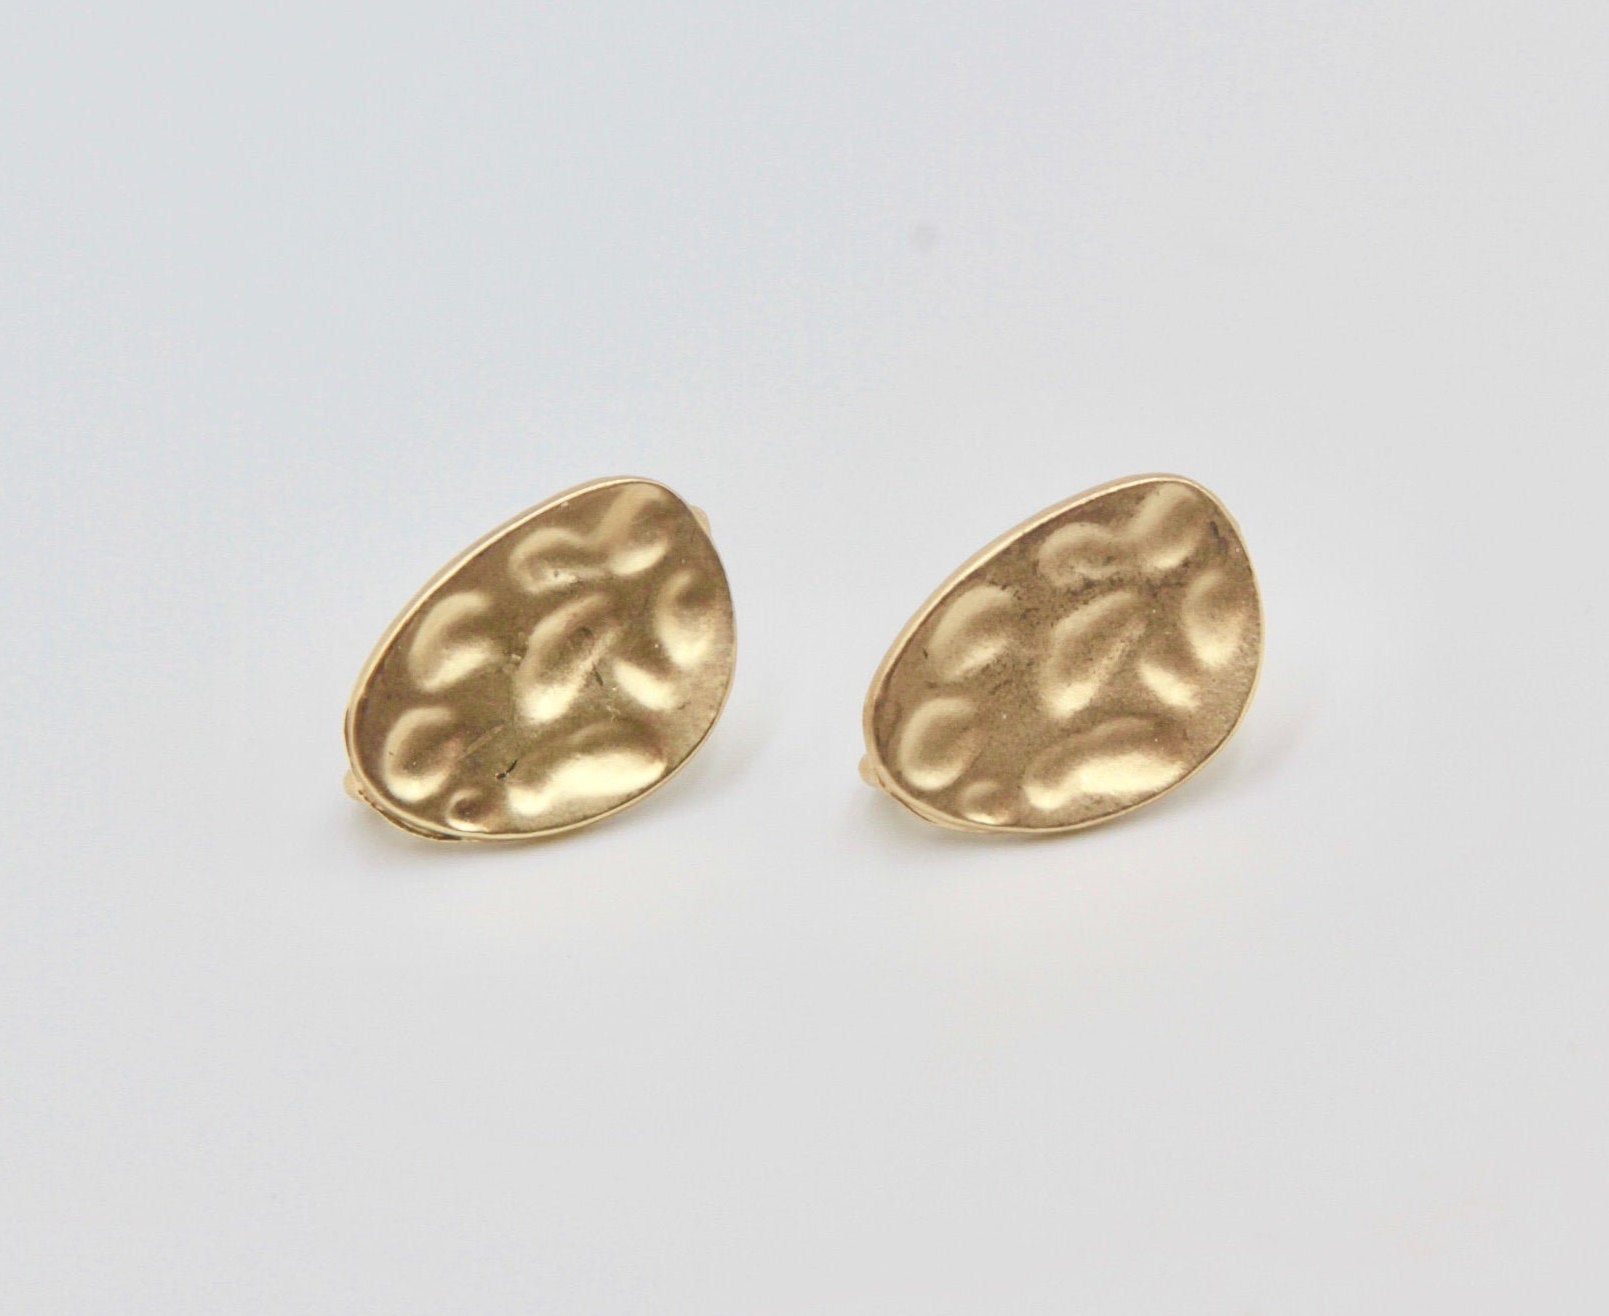 1 pair(2pcs), 13mmx19mm, Vintage Style Distorted Oval Alloy Ear Stud in Matt Gold